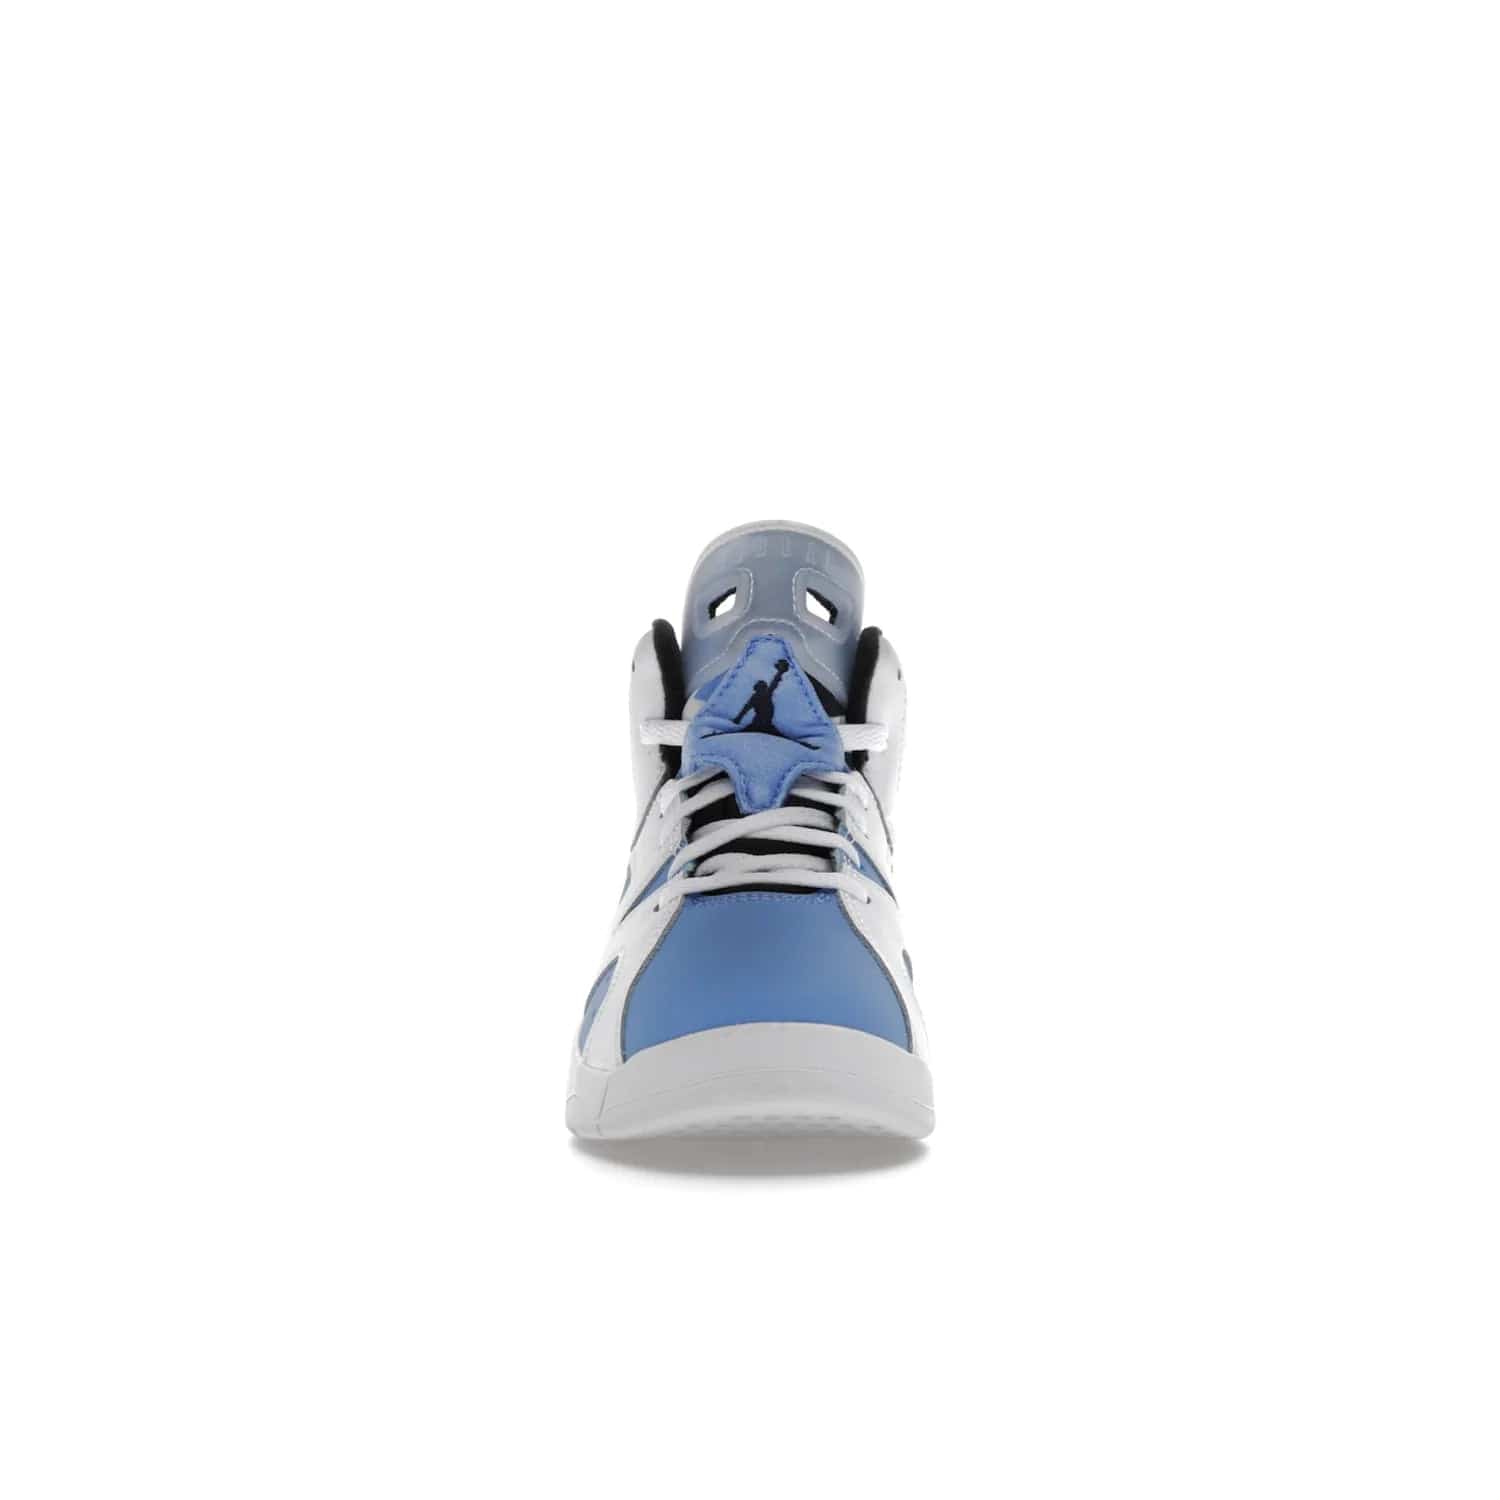 Jordan 6 Retro UNC White (PS) - Image 10 - Only at www.BallersClubKickz.com - The Air Jordan 6 Retro UNC White PS celebrates Michael Jordan's alma mater, the University of North Carolina. It features a classic color-blocking of the iconic Jordan 6 Carmine and a stitched Jordan Team patch. This must-have sneaker released on April 27th, 2022. Referencing the university colors, get this shoe for a stylish and timeless style with university pride.